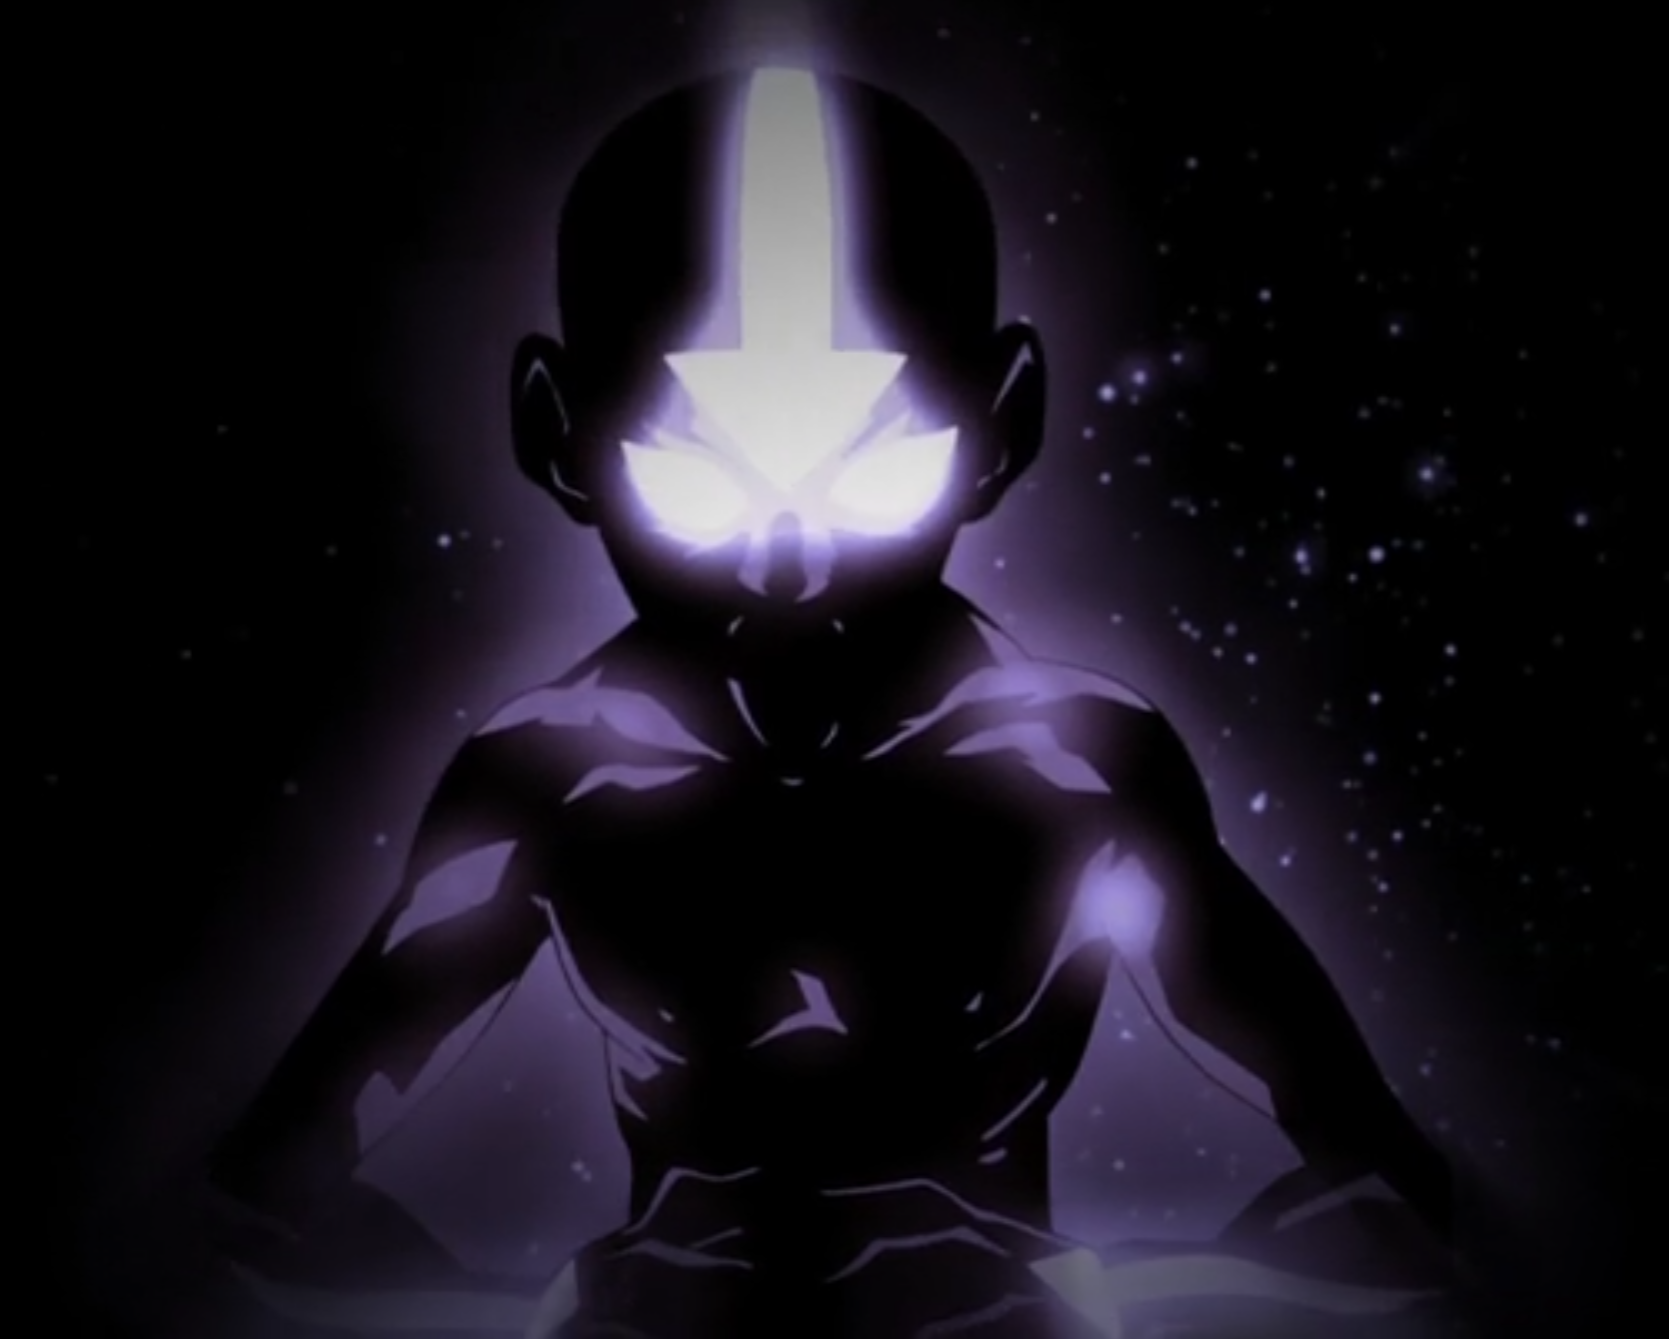 Confliction within Aang and ascension